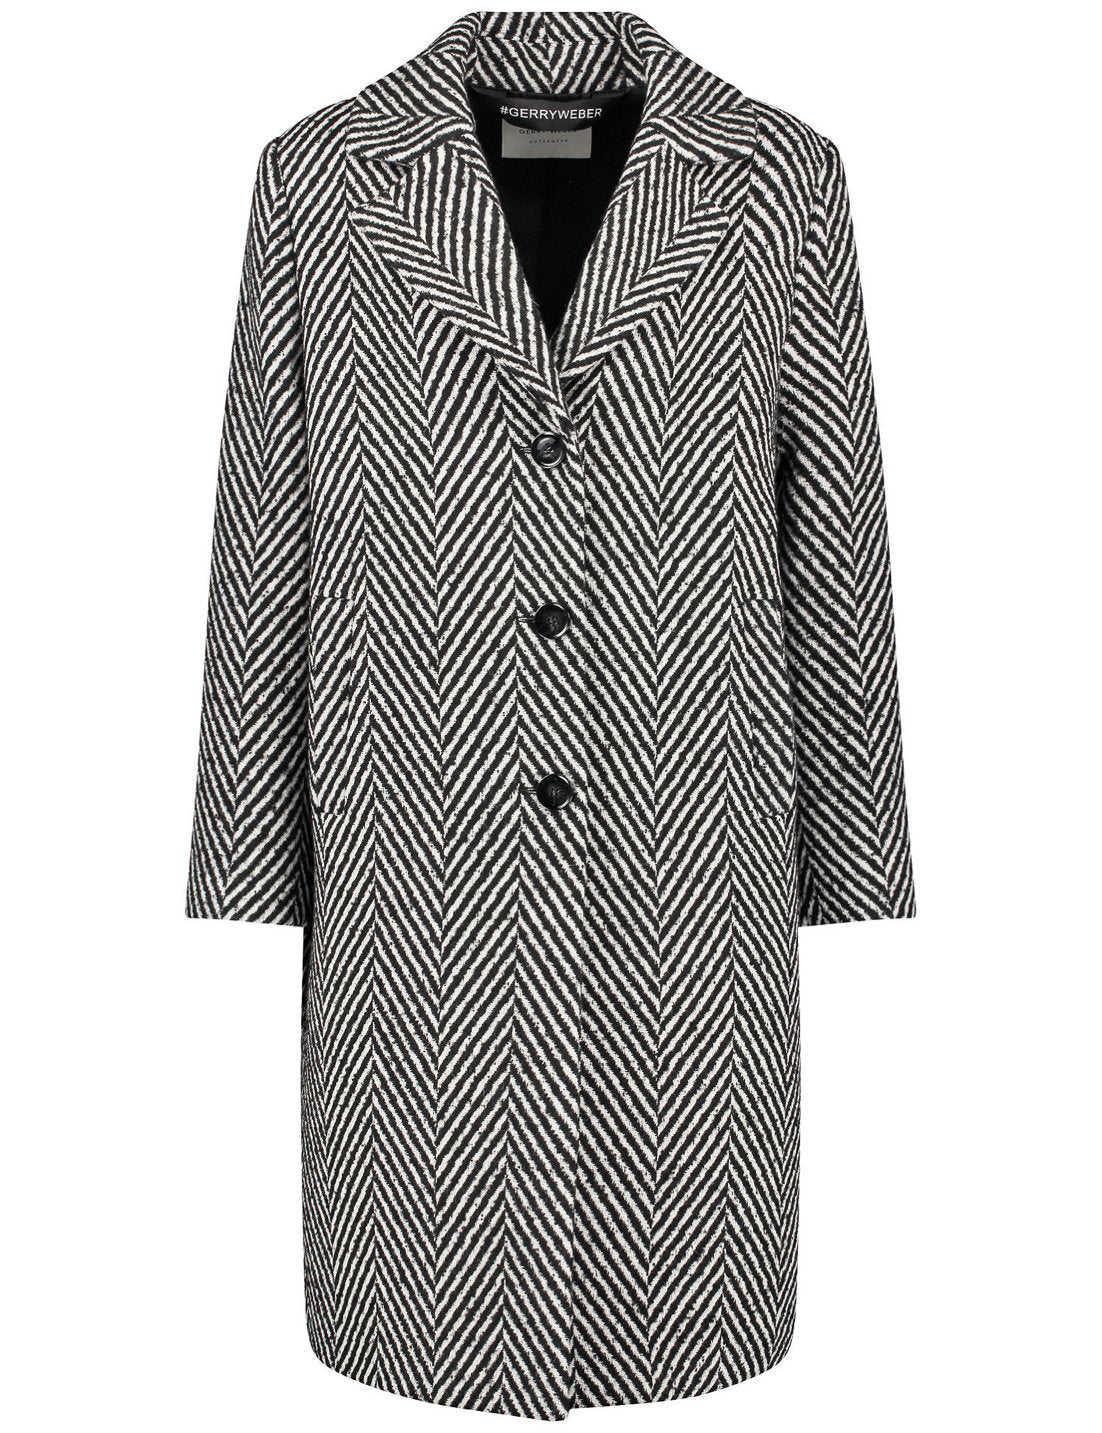 Wool Coat With A Large Lapel Collar_250016-31147_2000_02